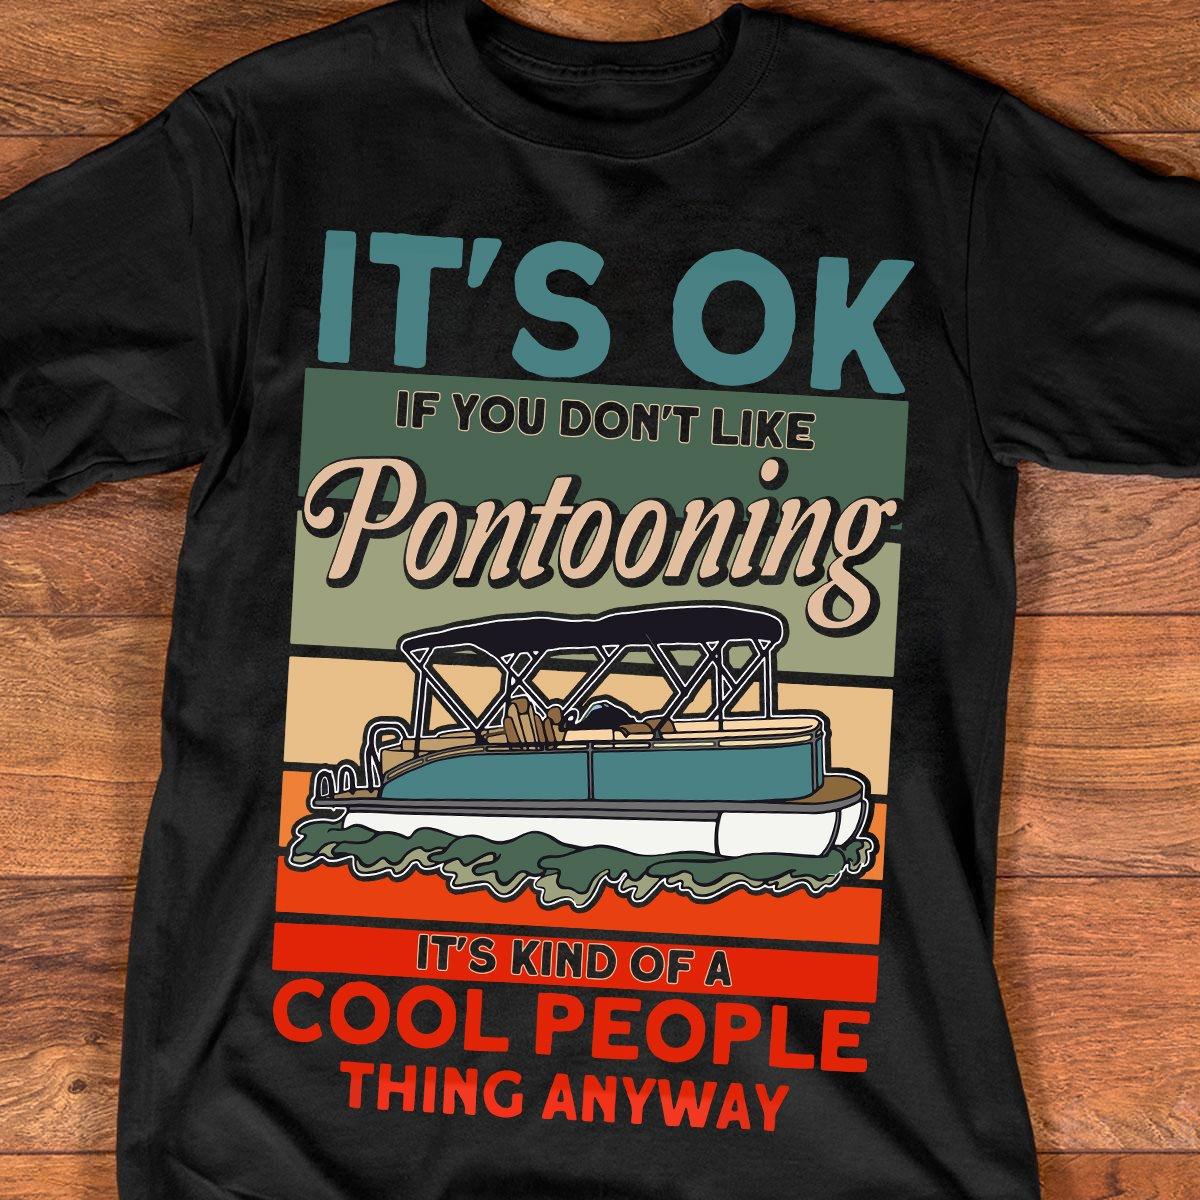 It's ok if you don't like pontooning it's kind of a cool people thing anyway - Love to go pontooning